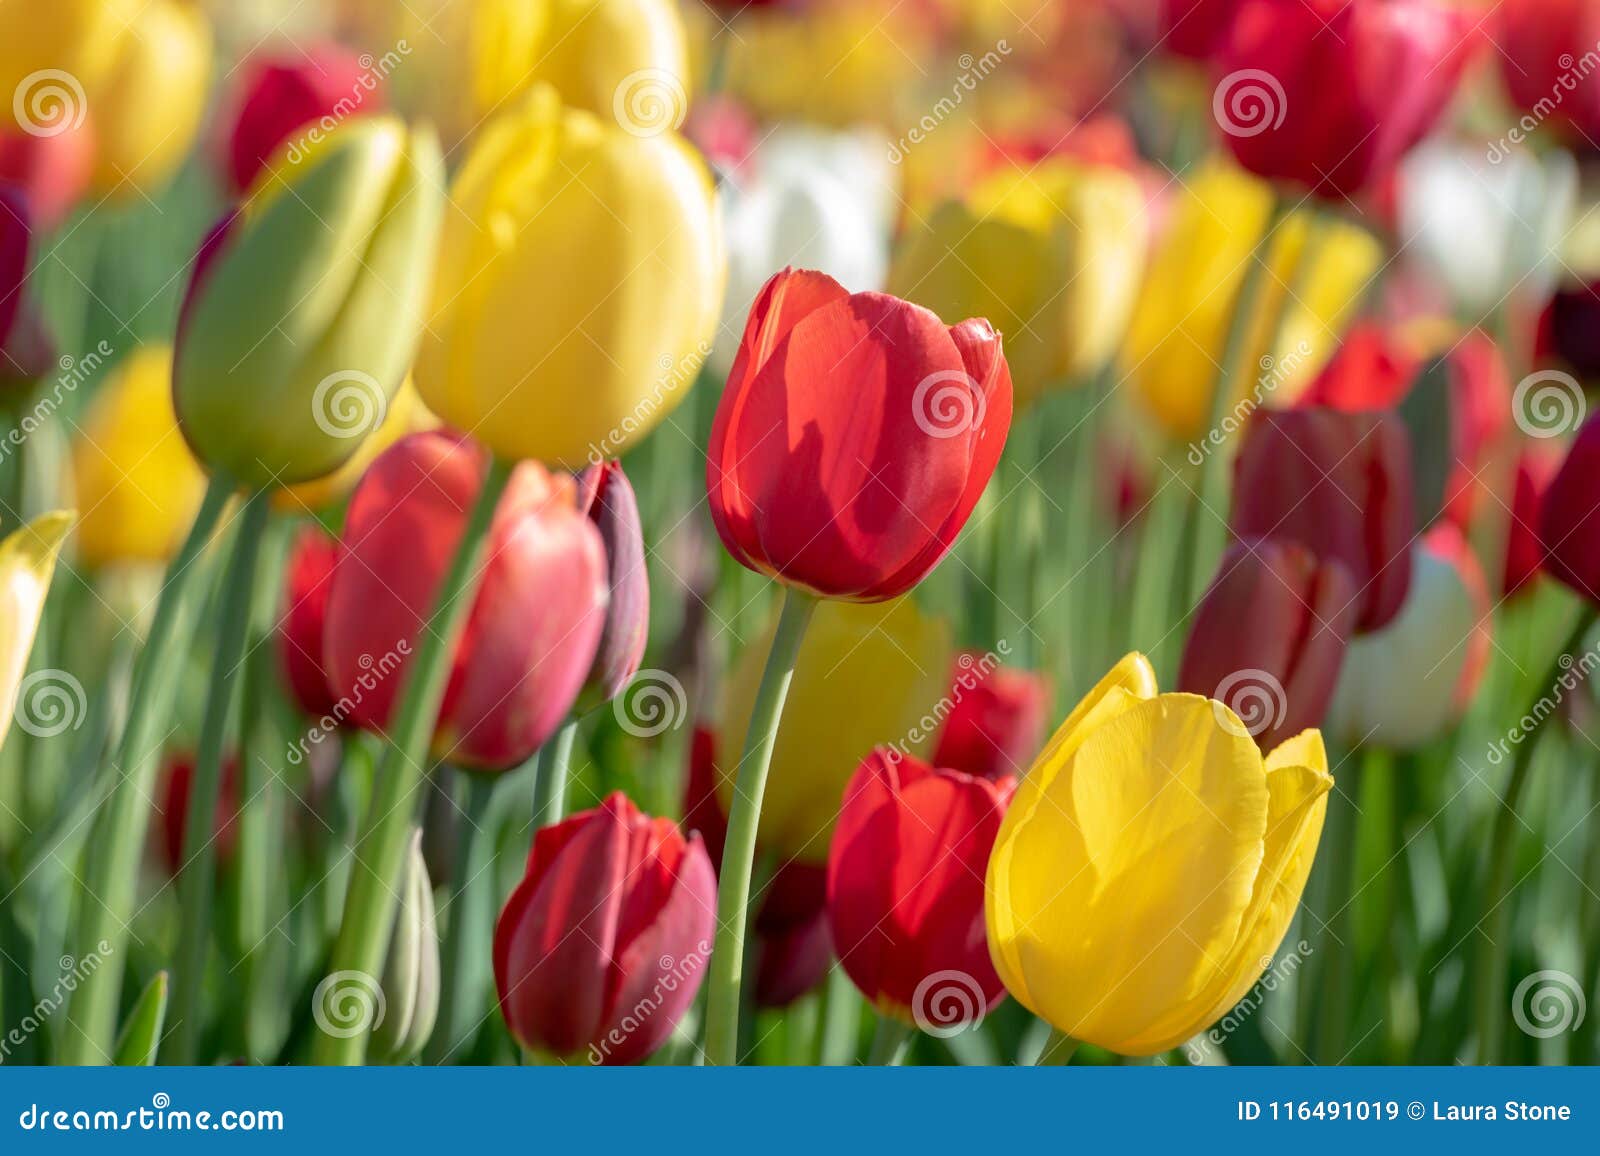 Close-up View of Colorful Tulips at a Tulip Farm Stock Image - Image of ...